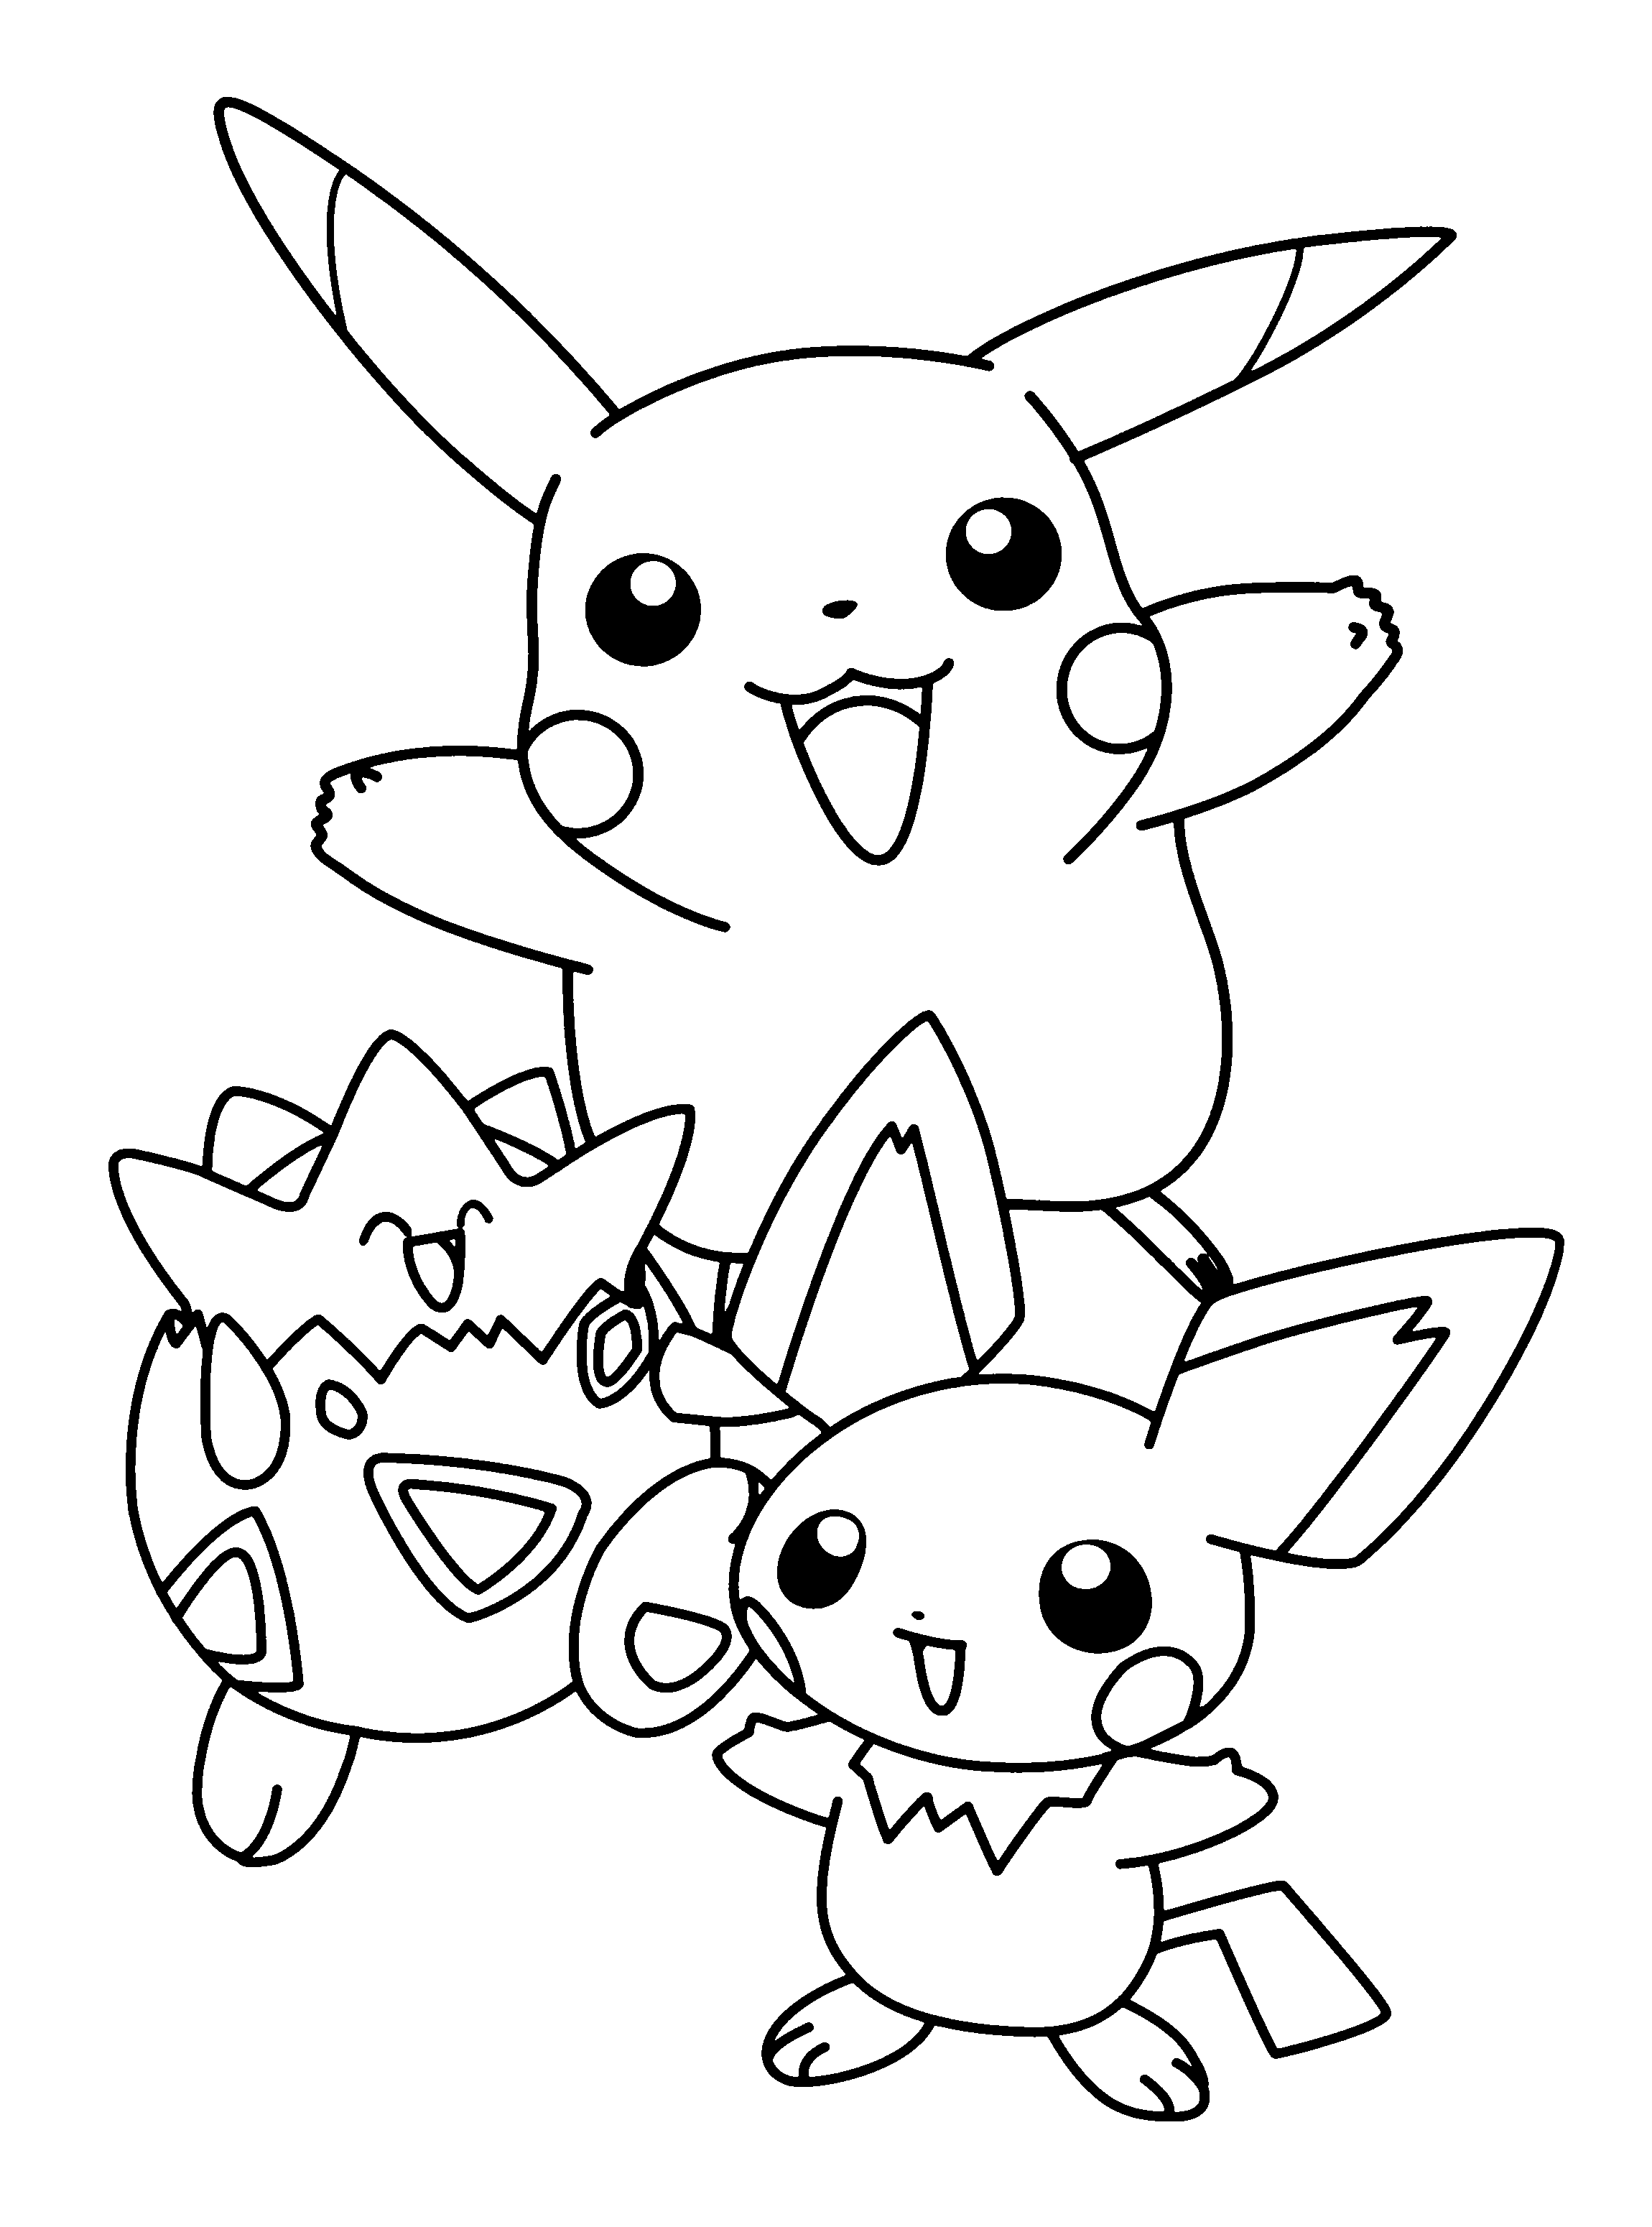 Pokemon Free To Color For Kids All Pokemon Coloring Pages Kids Coloring Pages